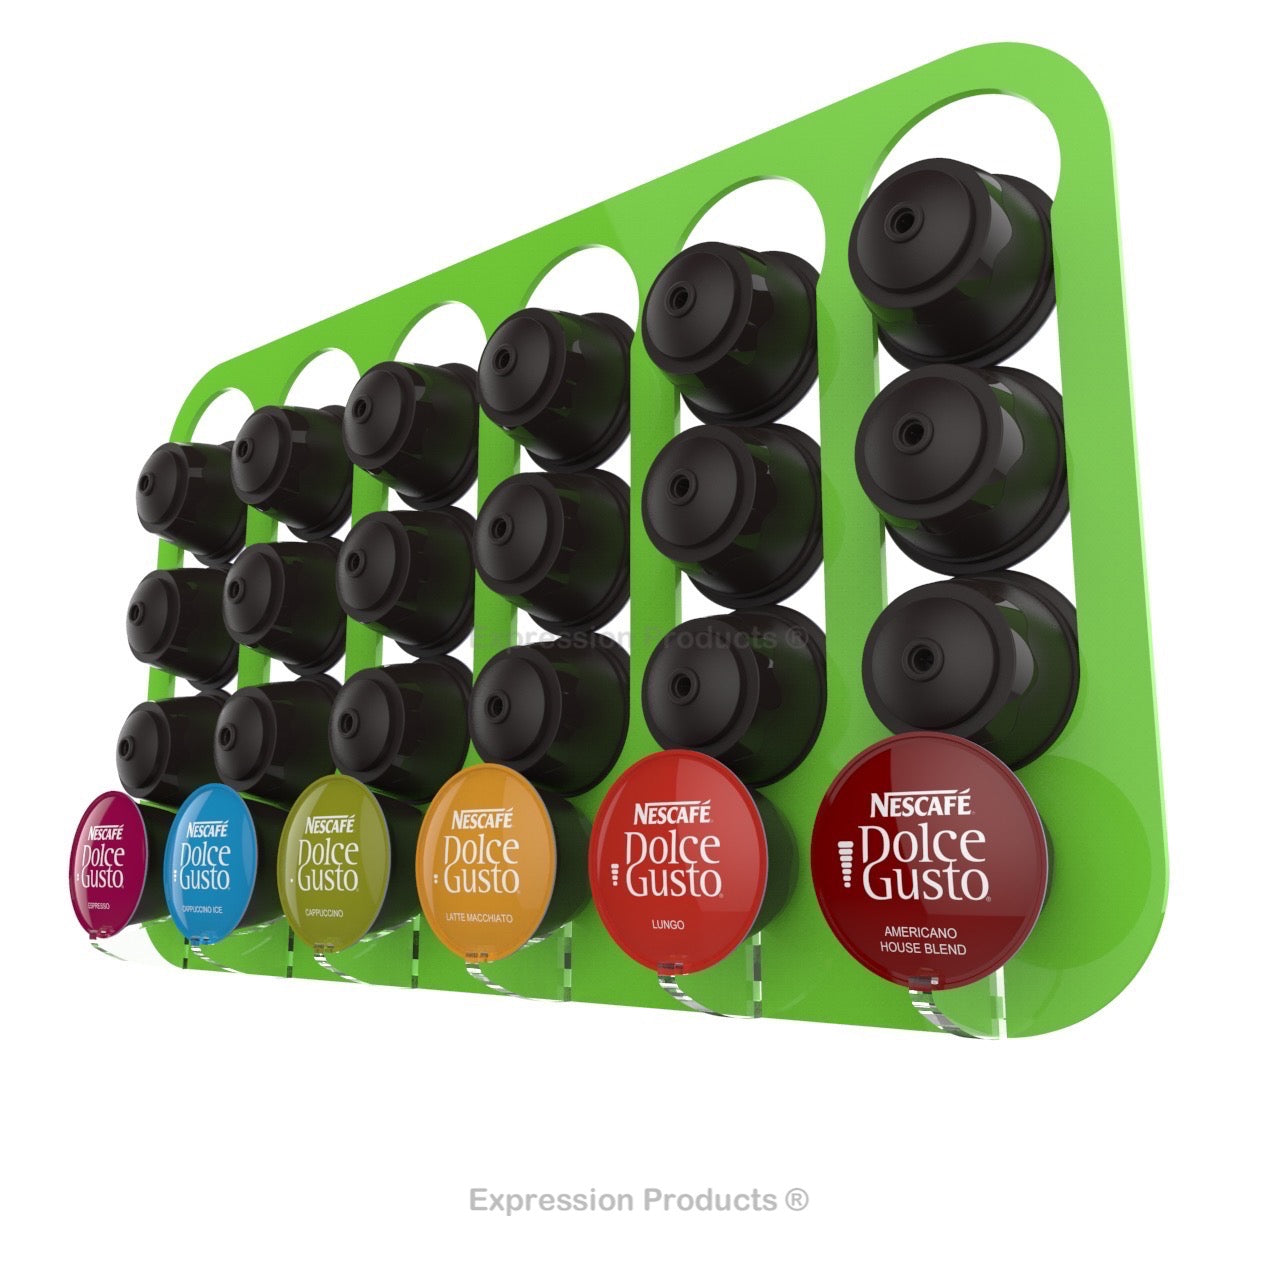 Dolce gusto coffee pod holder, wall mounted, half height.  Shown in lime holding 24 pods